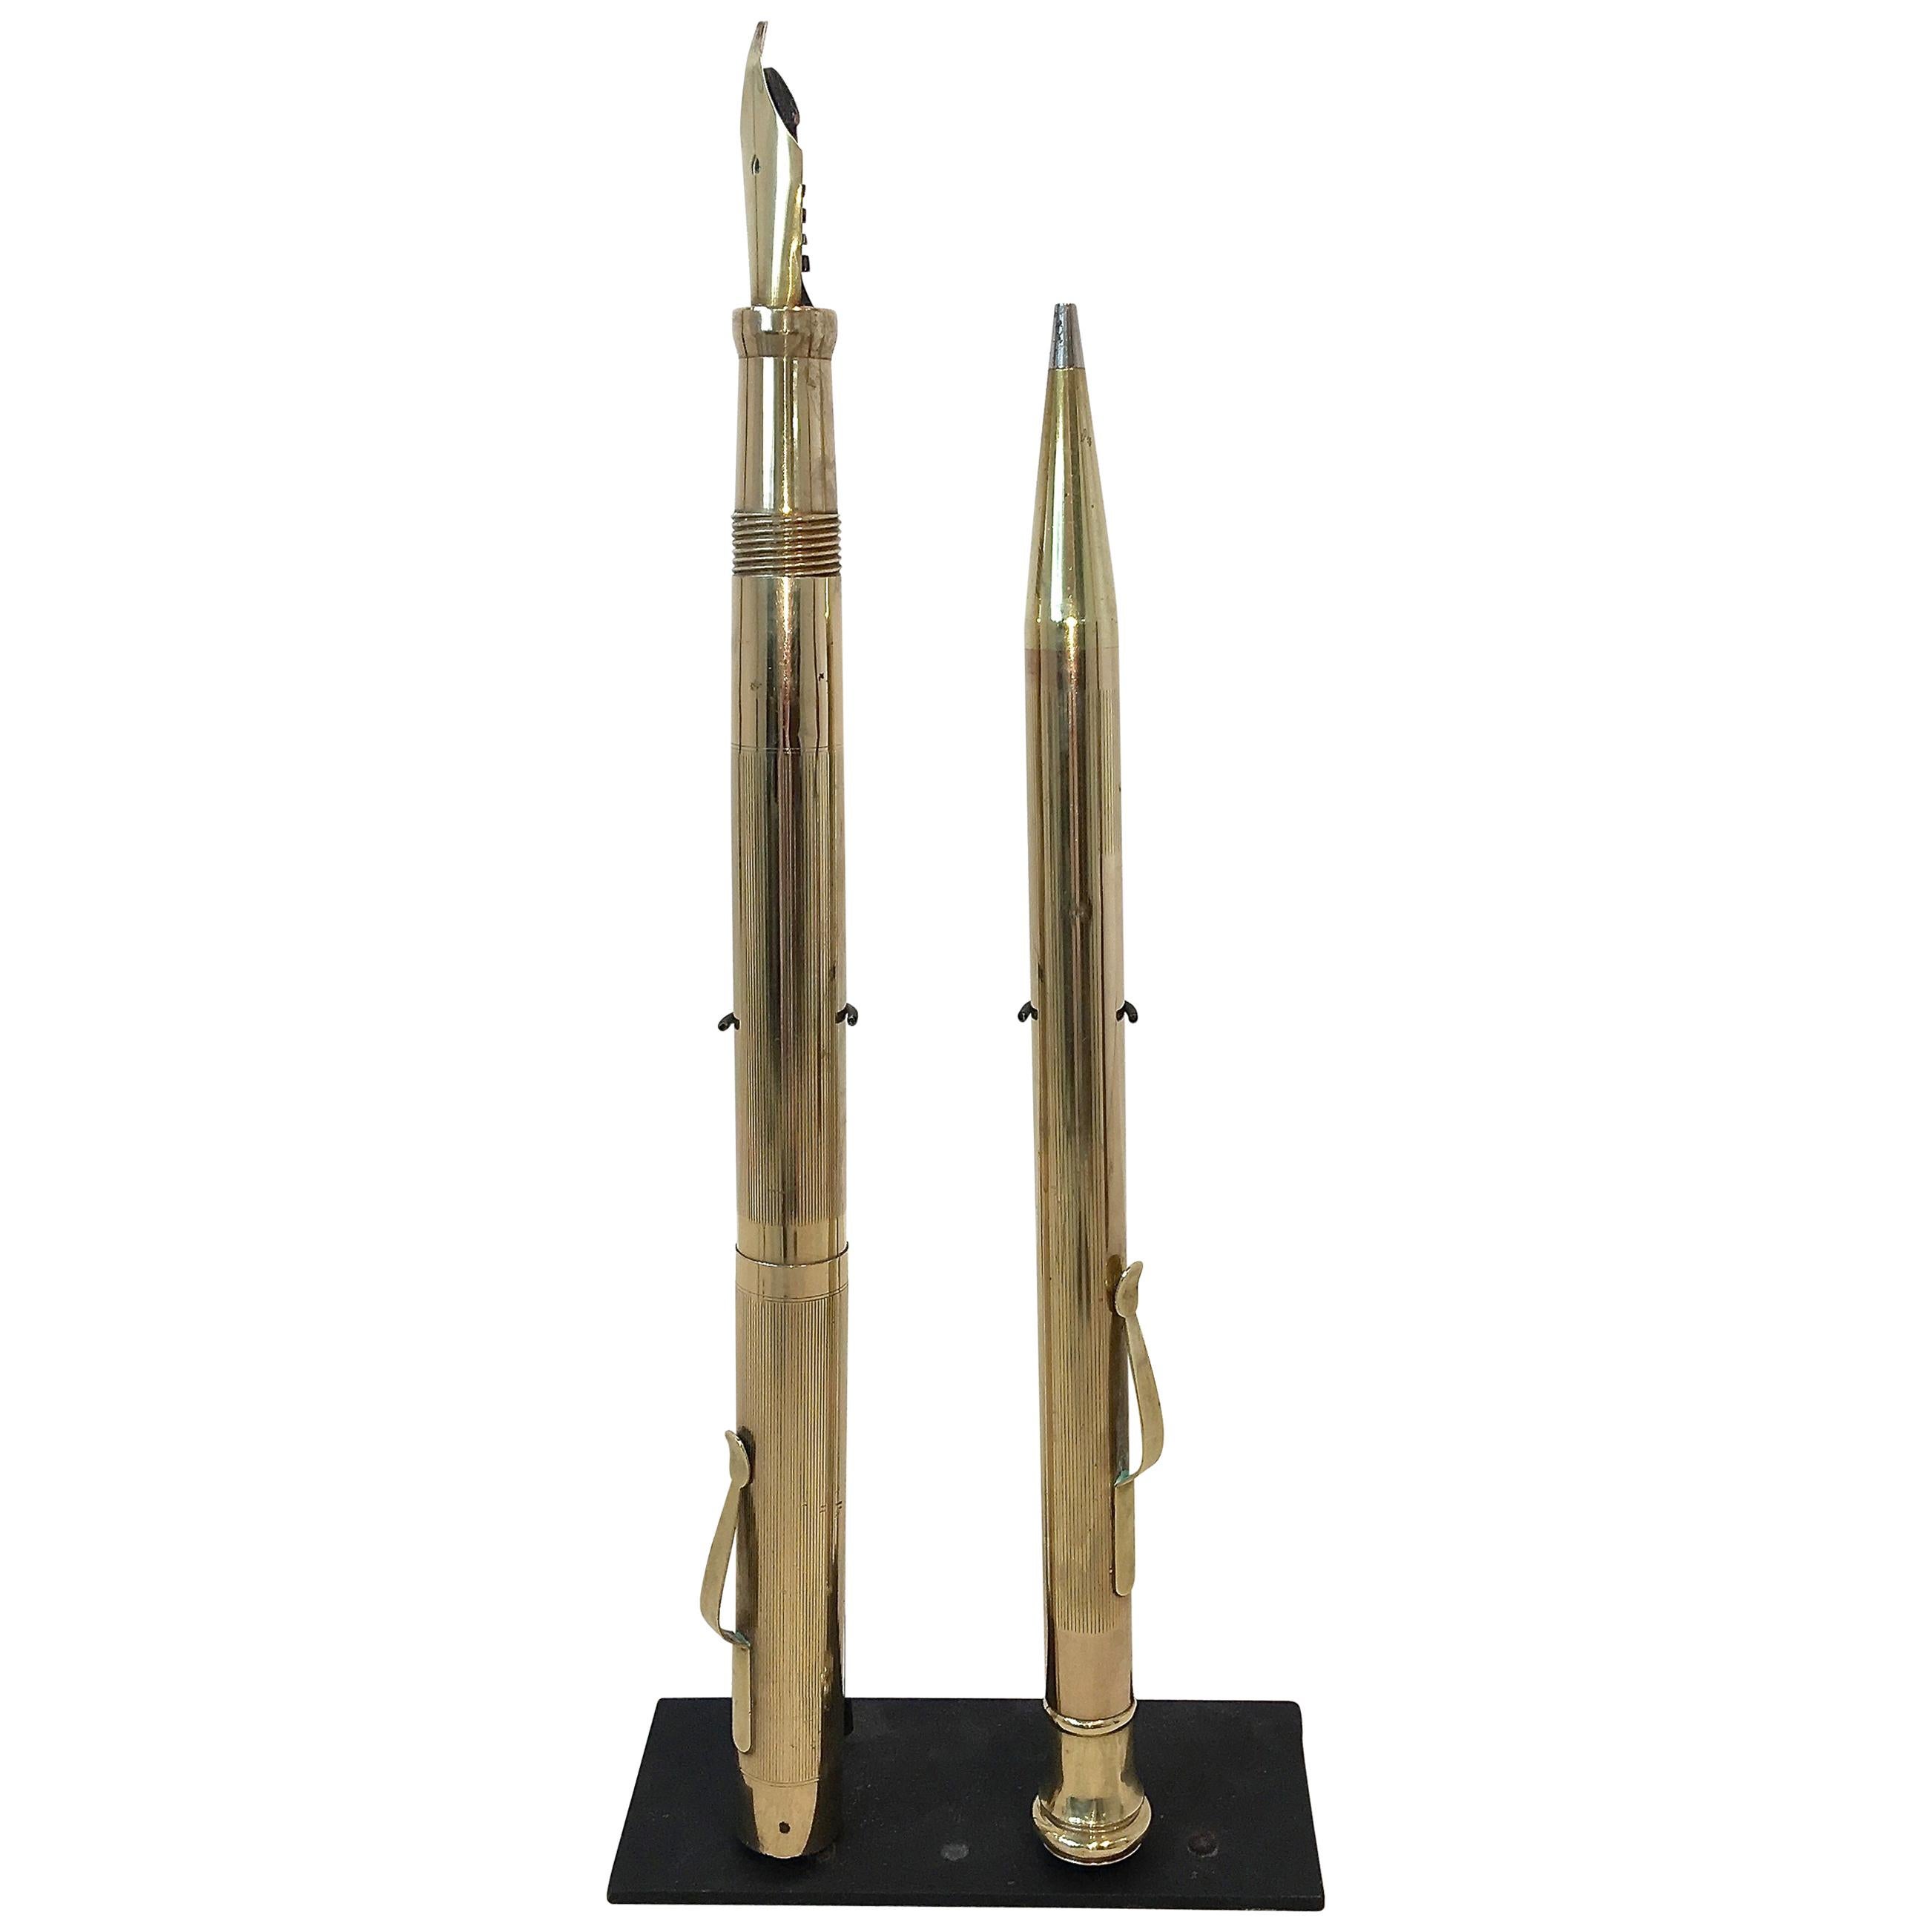 Giant Art Deco Brass Fountain Pen and Mechanical Pencil Display Models